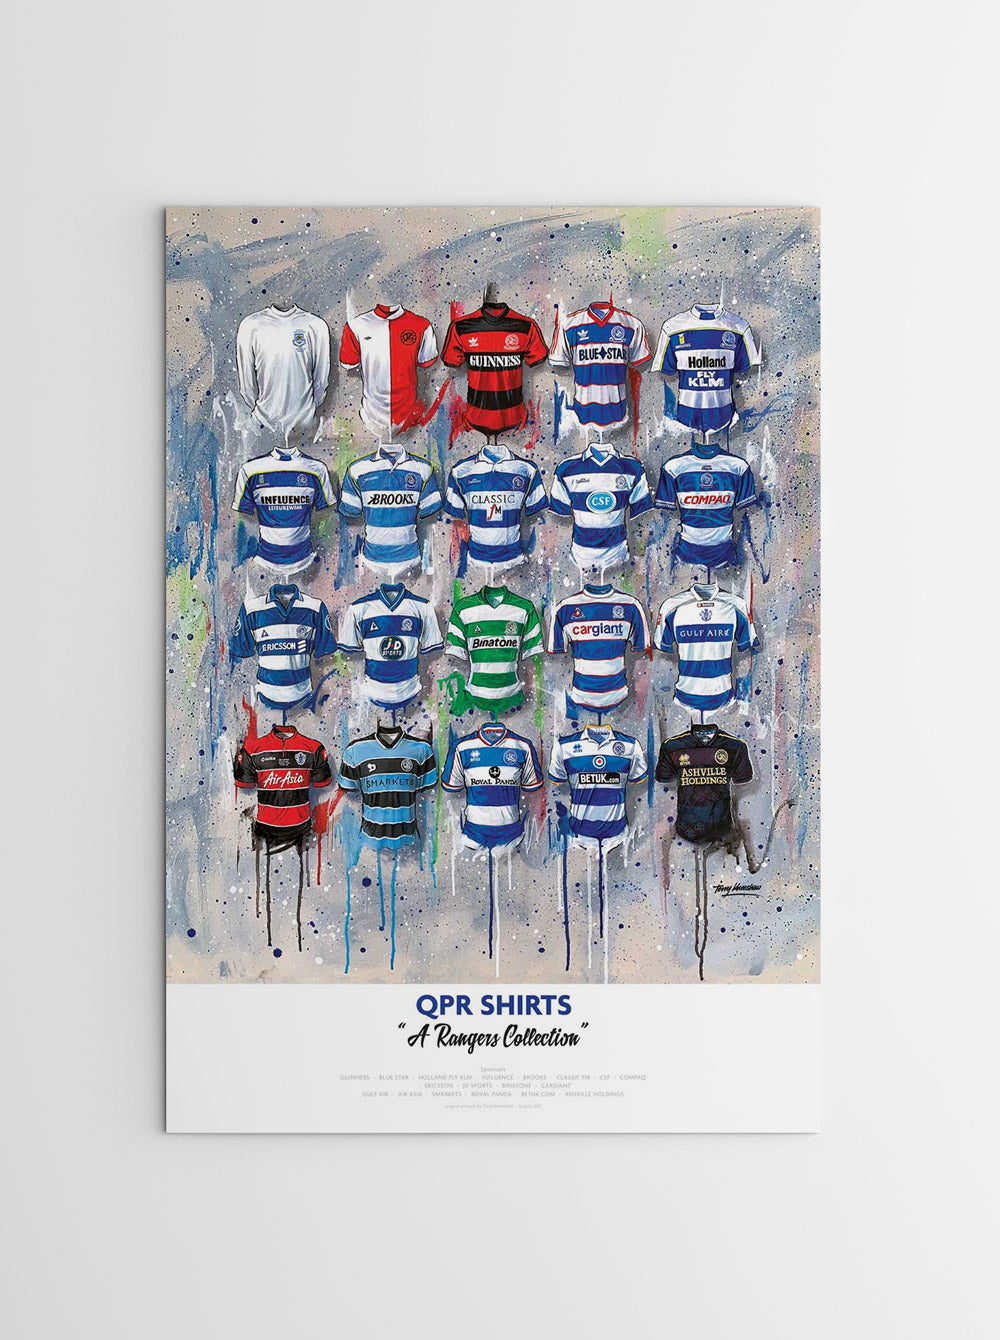 A limited edition A2 print by artist Terry Kneeshaw, featuring 20 iconic jerseys from the QPR football team's history. The jerseys are arranged in a symmetrical grid pattern and are labelled with the corresponding year and design. The artwork has a vintage feel, with muted colours and a slightly distressed texture. Perfect for any QPR fan.